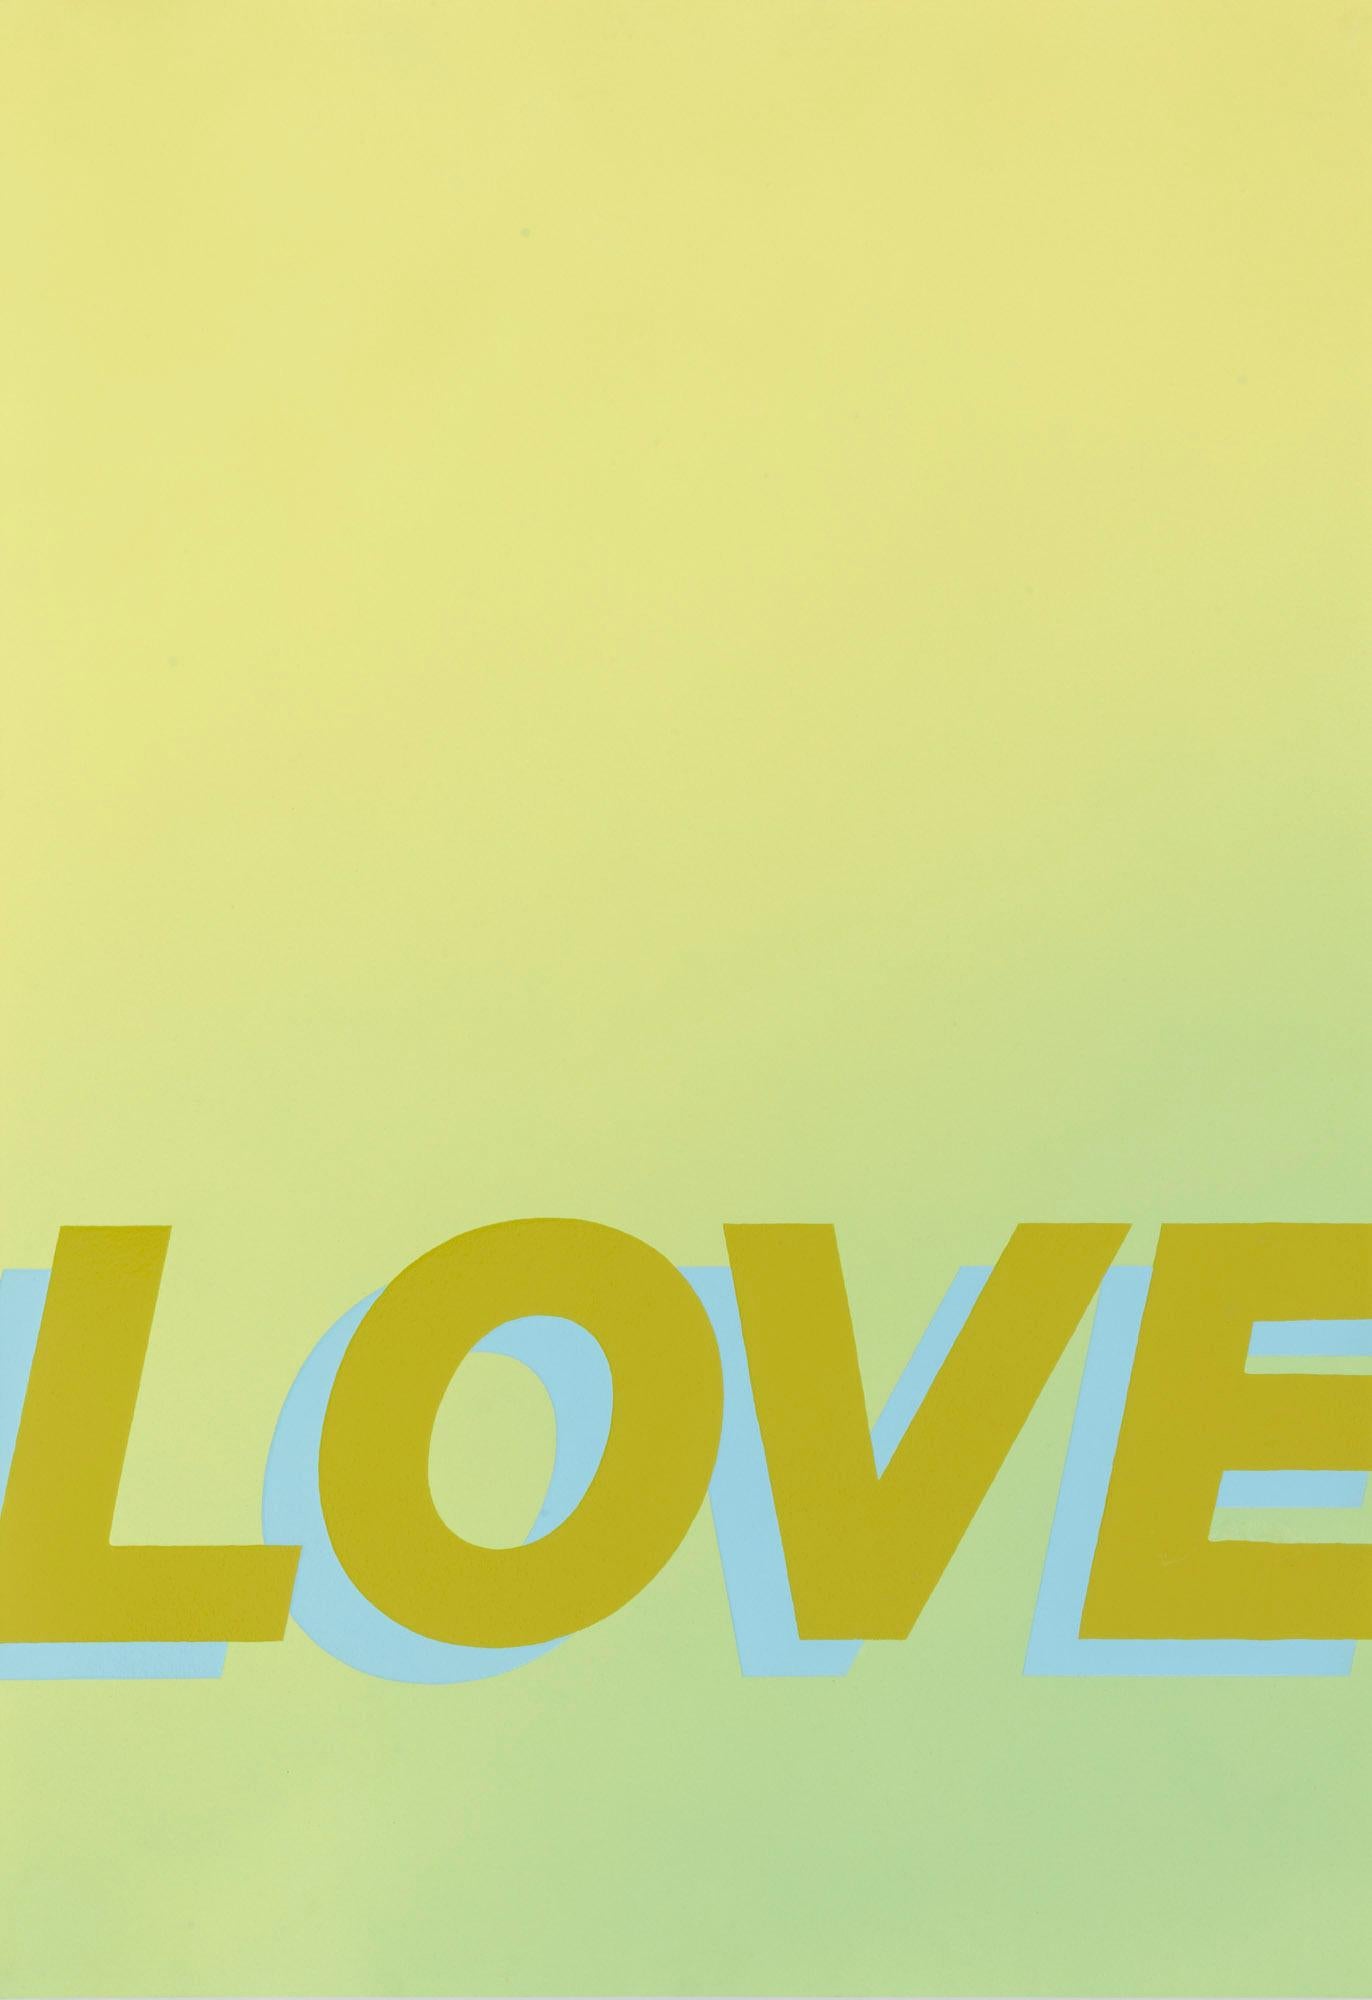 Untitled (Love), 2018 is a unique contemporary textual painting on paper. The artist first creates a unique background atmosphere with matte spray paint and then meticulously hand-paints text in his material of choice, nail enamel.

Artwork is sold